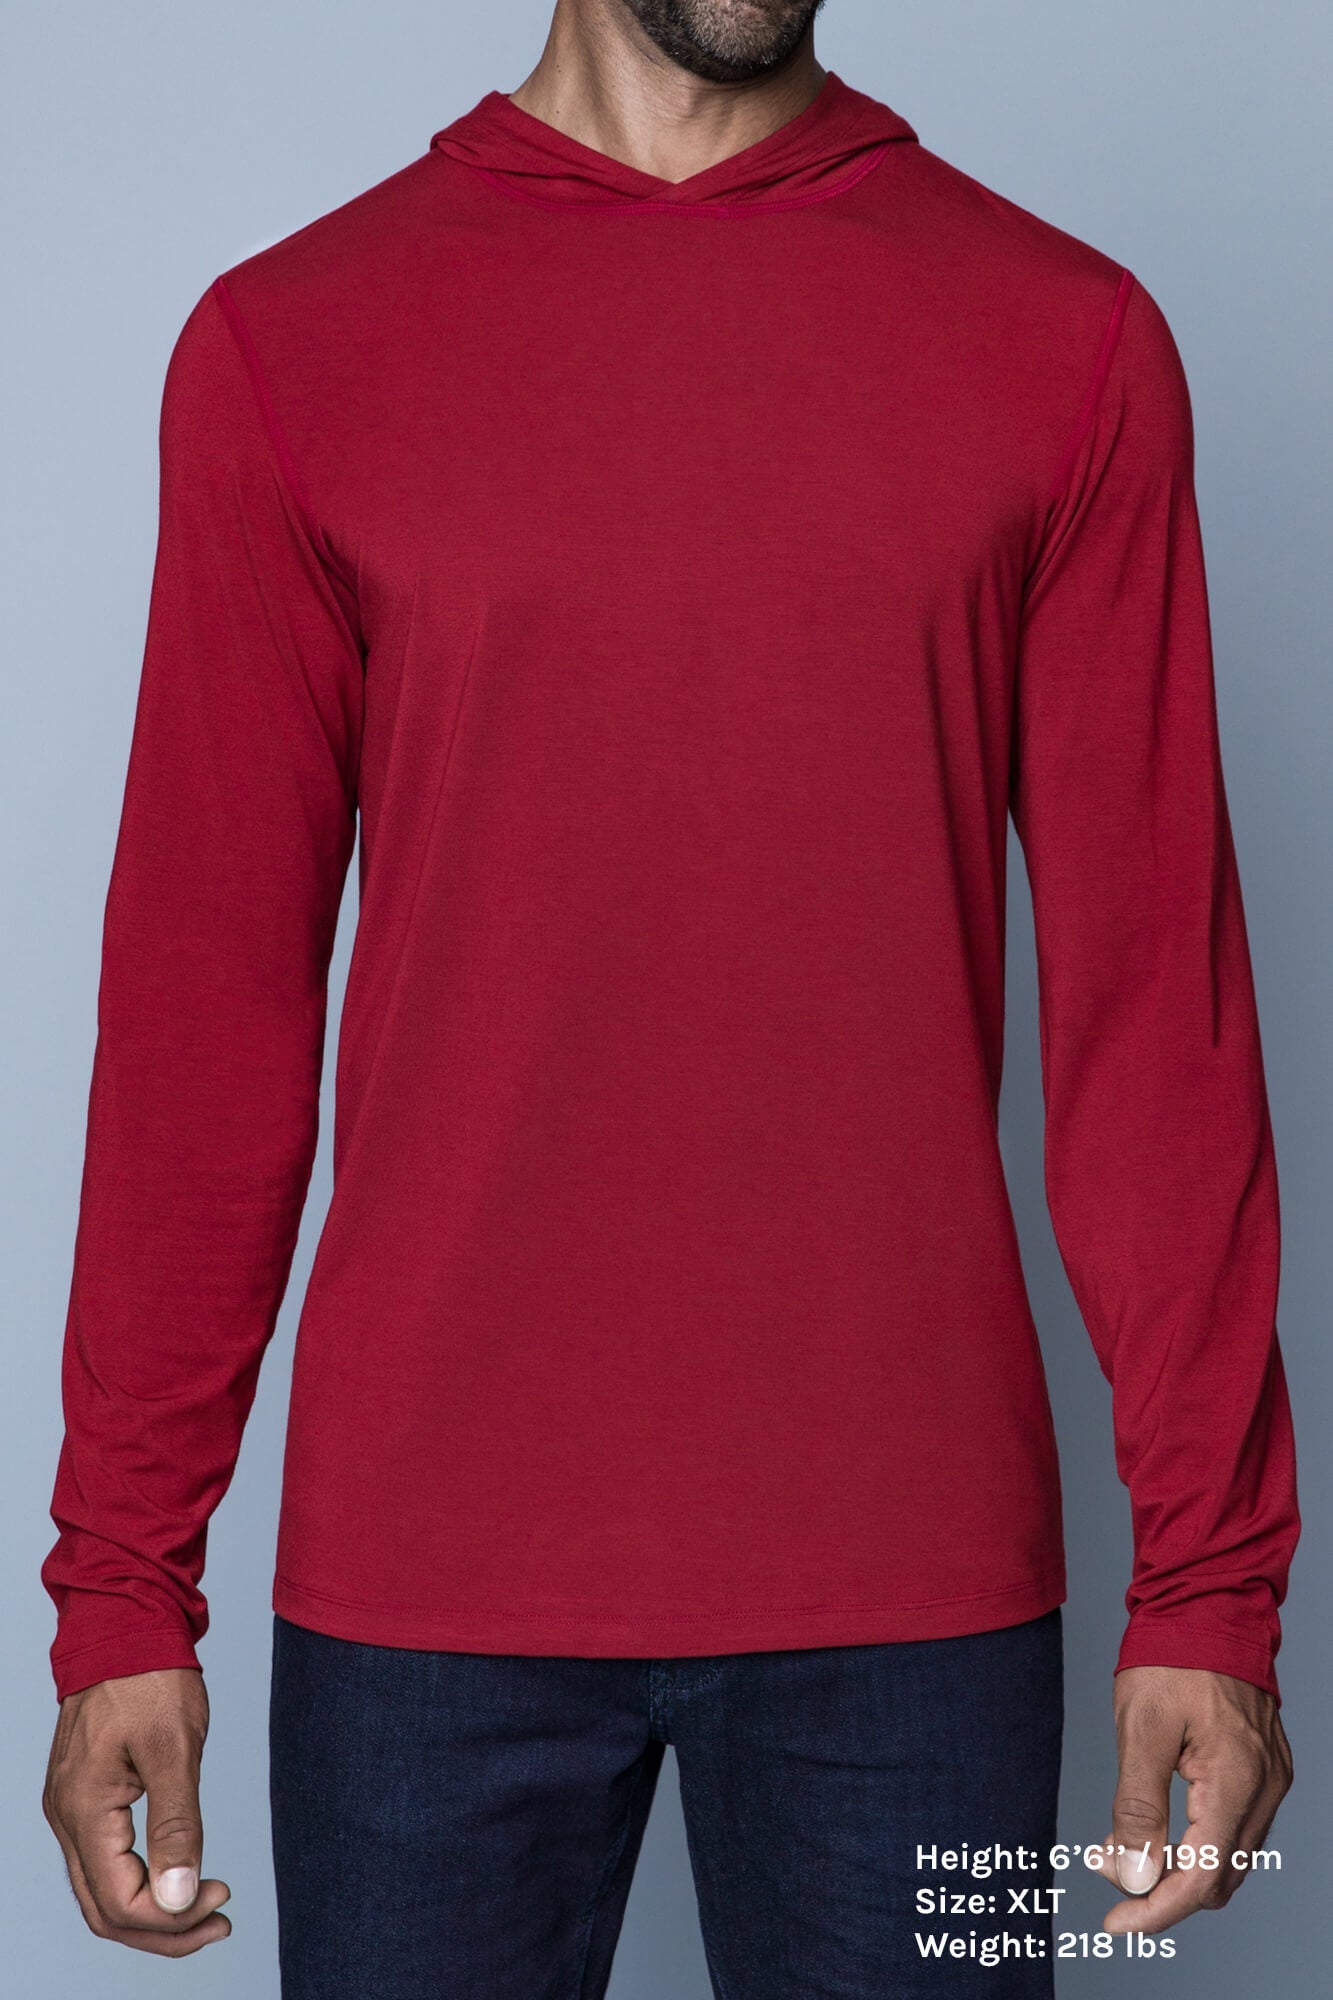 The Navas Lab Vasquez 2020 long-sleeve hooded shirt for tall guys in red. The perfect tall slim shirt for tall and slim guys looking for style and comfort.